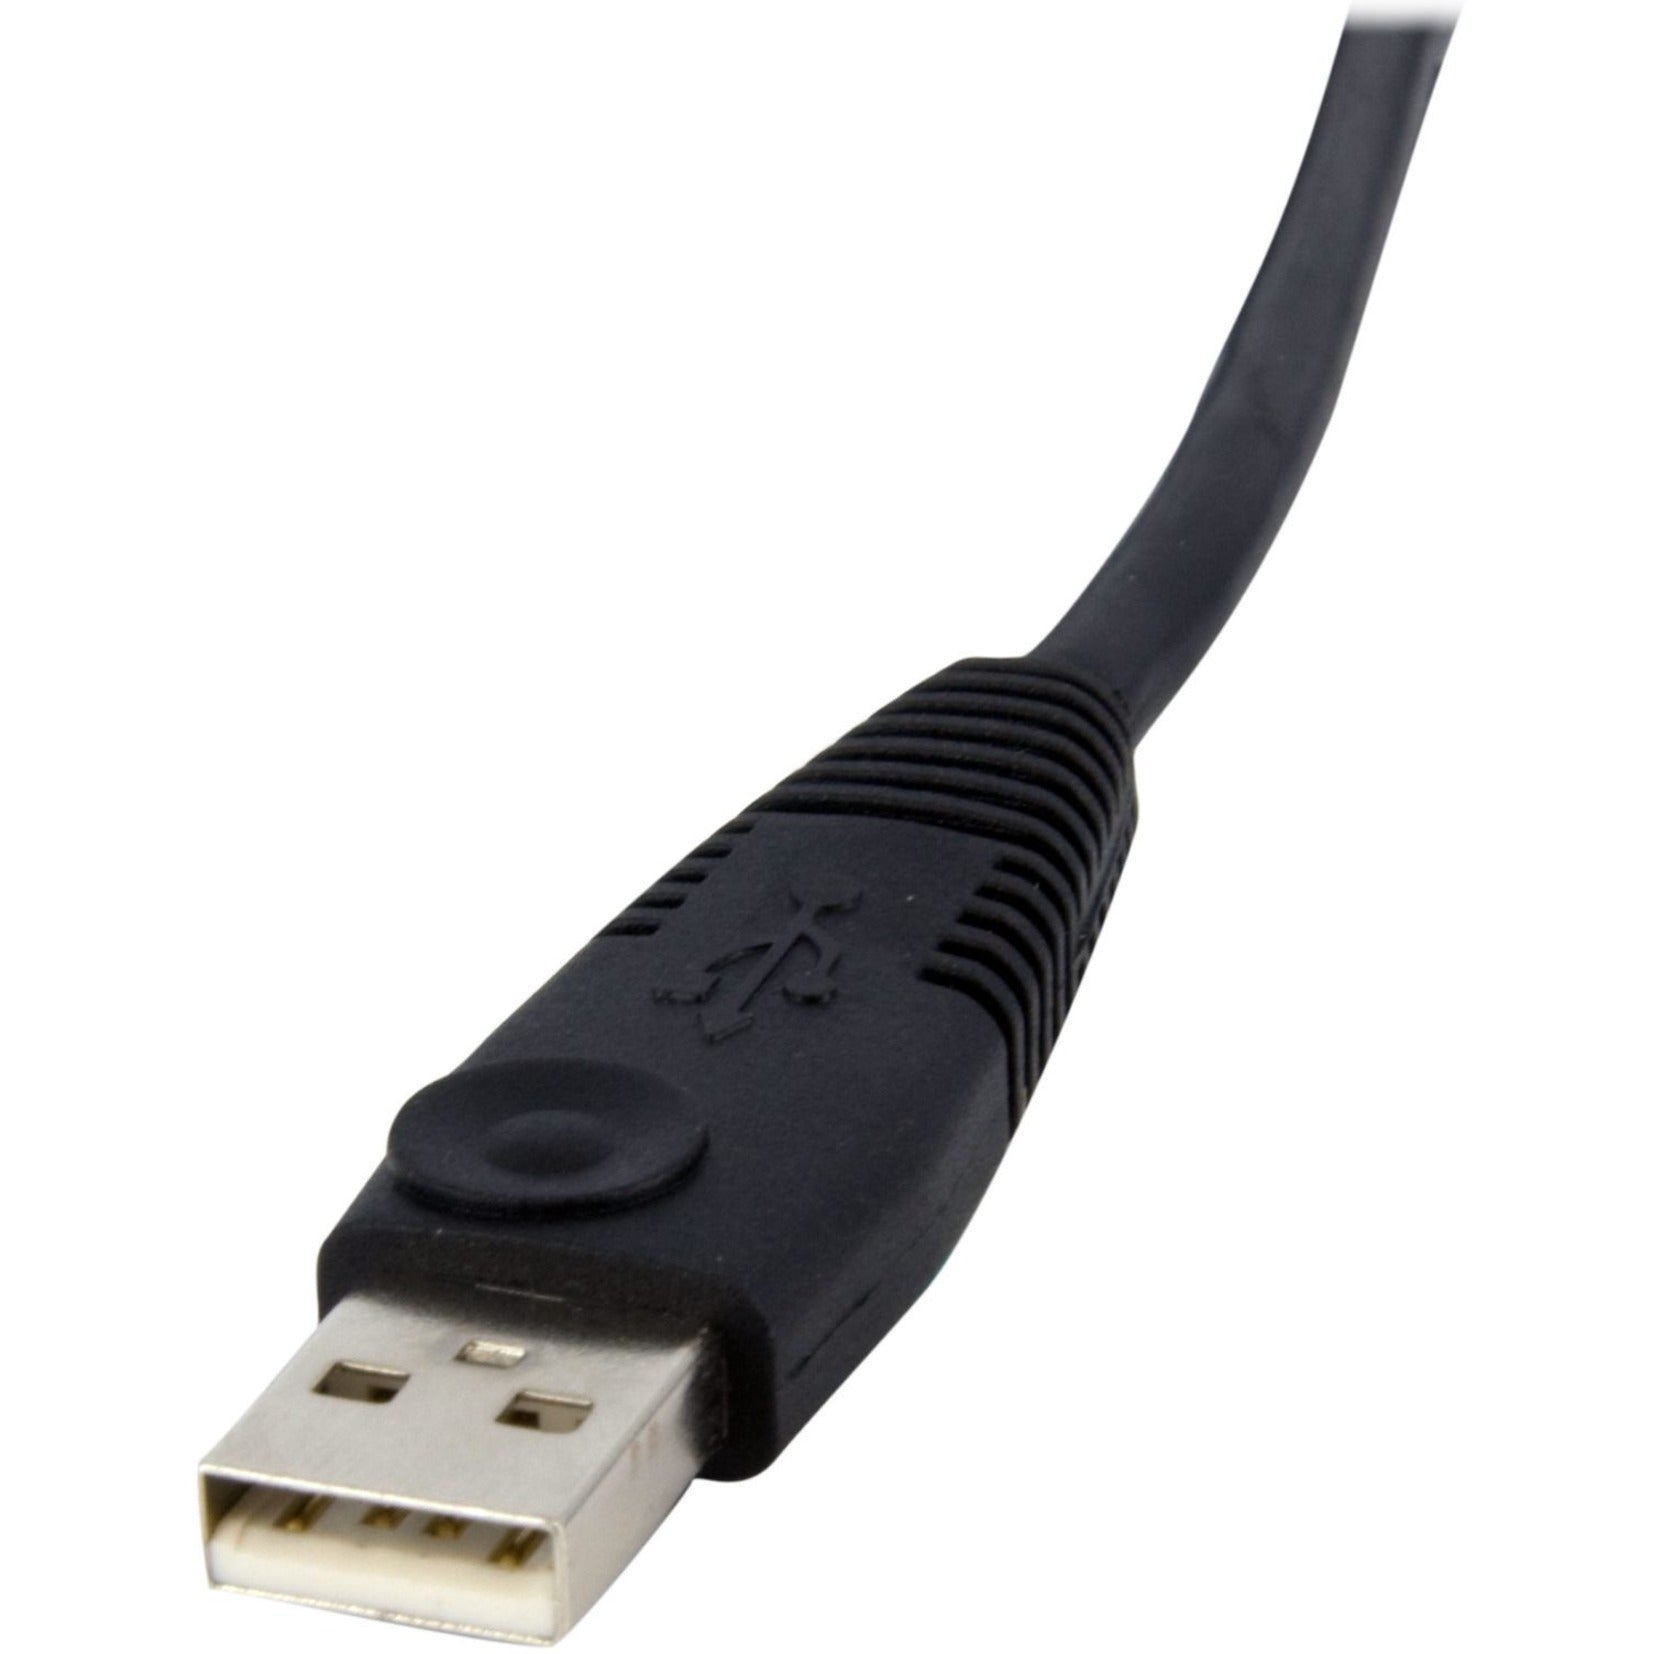 StarTech.com DVID4N1USB6 6ft 4-in-1 USB Dual Link DVI-D KVM Switch Cable with Audio & Microphone, Copper Conductor, 7.9 Gbit/s Data Transfer Rate [Discontinued]